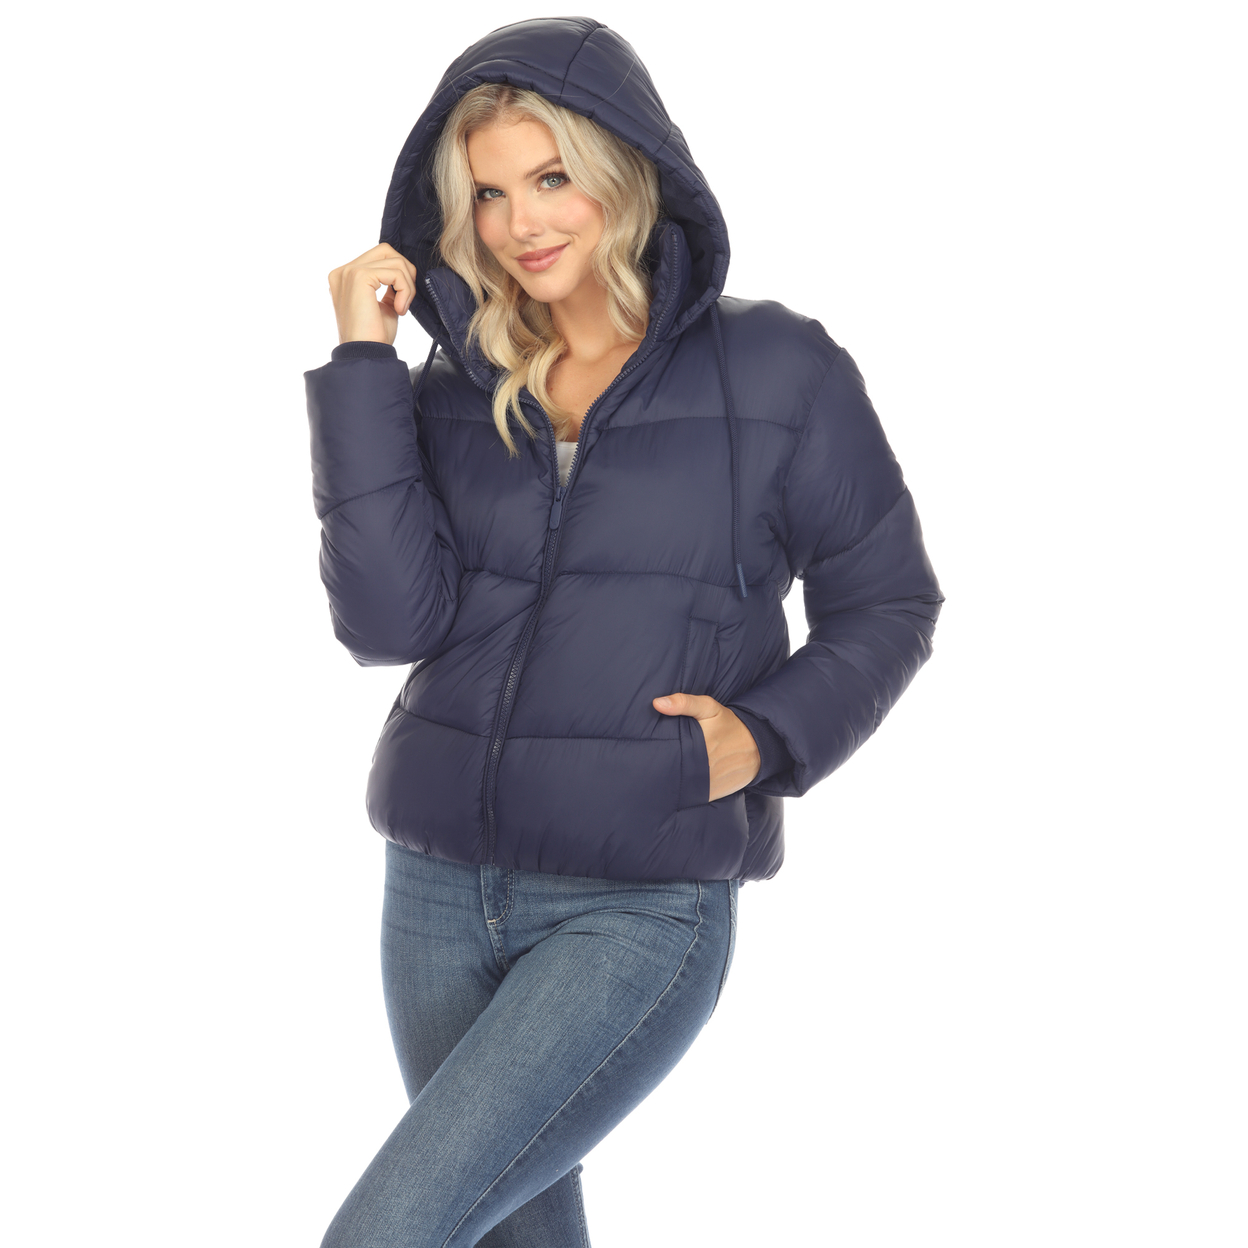 White Mark Women's Zip Hooded Puffer Jacket With Pockets - Gray, Large